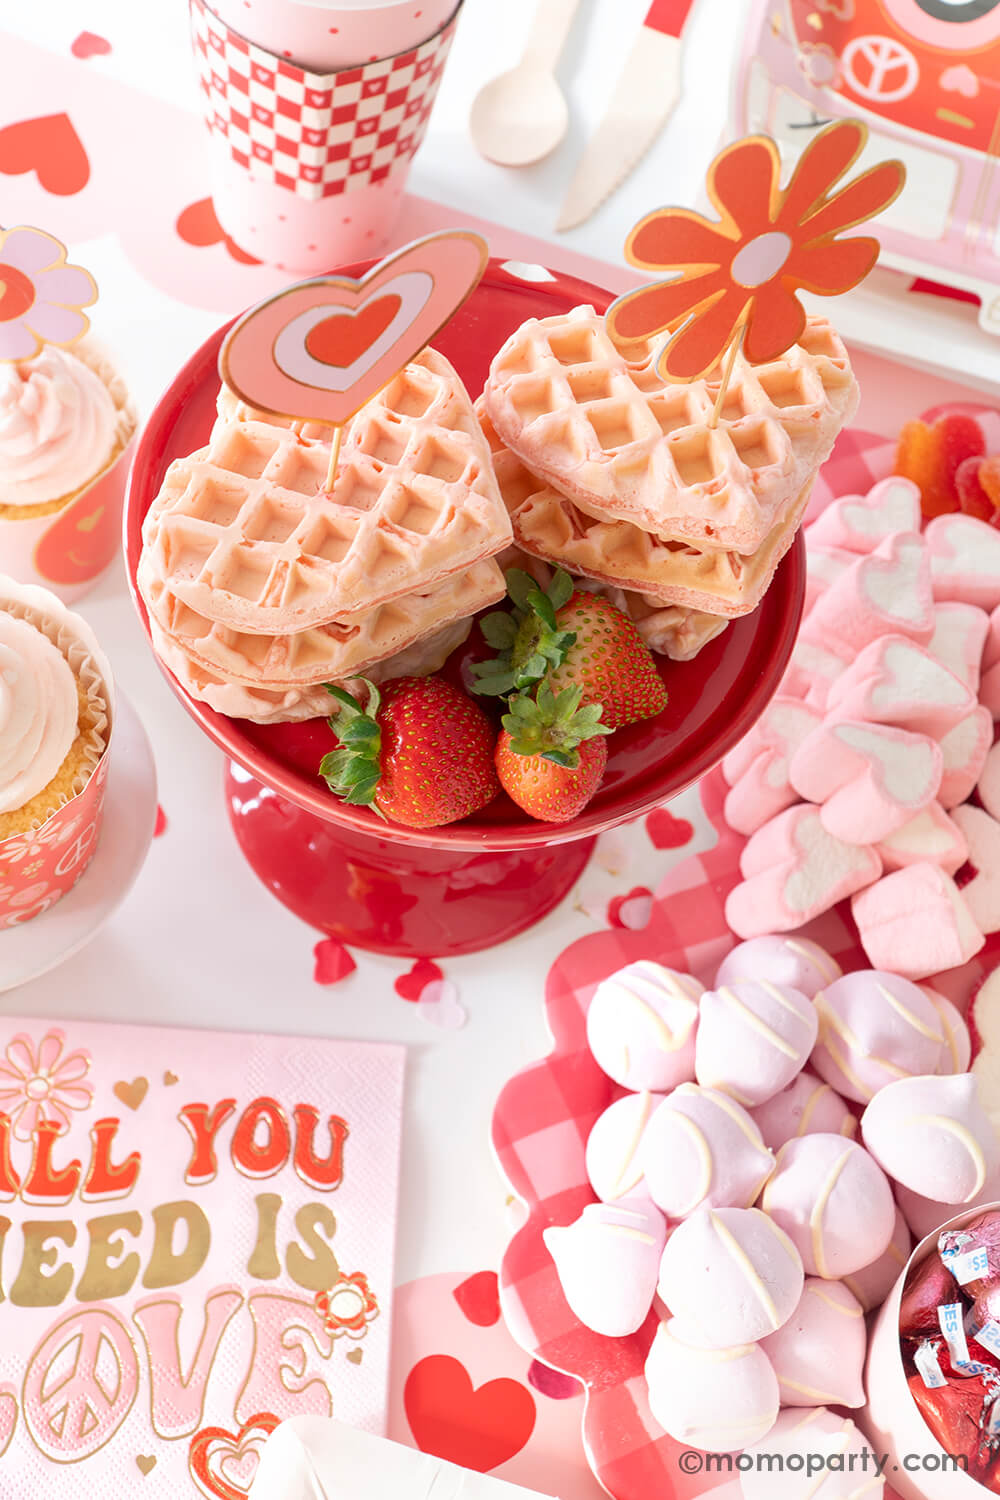 A festive Valentine's Day party table featuring a sweet board filled with heart shaped treats and desserts in pink and red. In the middle some heart shaped pink waffles topped with Momo Party's groovy love themed toppers with strawberries next to them. On the table there are lots of retro inspired Valentine's Day themed party supplies including Momo Party's all you need is love napkins, vw bus shaped plates, and red checkered party cups, makes this a perfect info for a sweet Valentine's Day celebration.